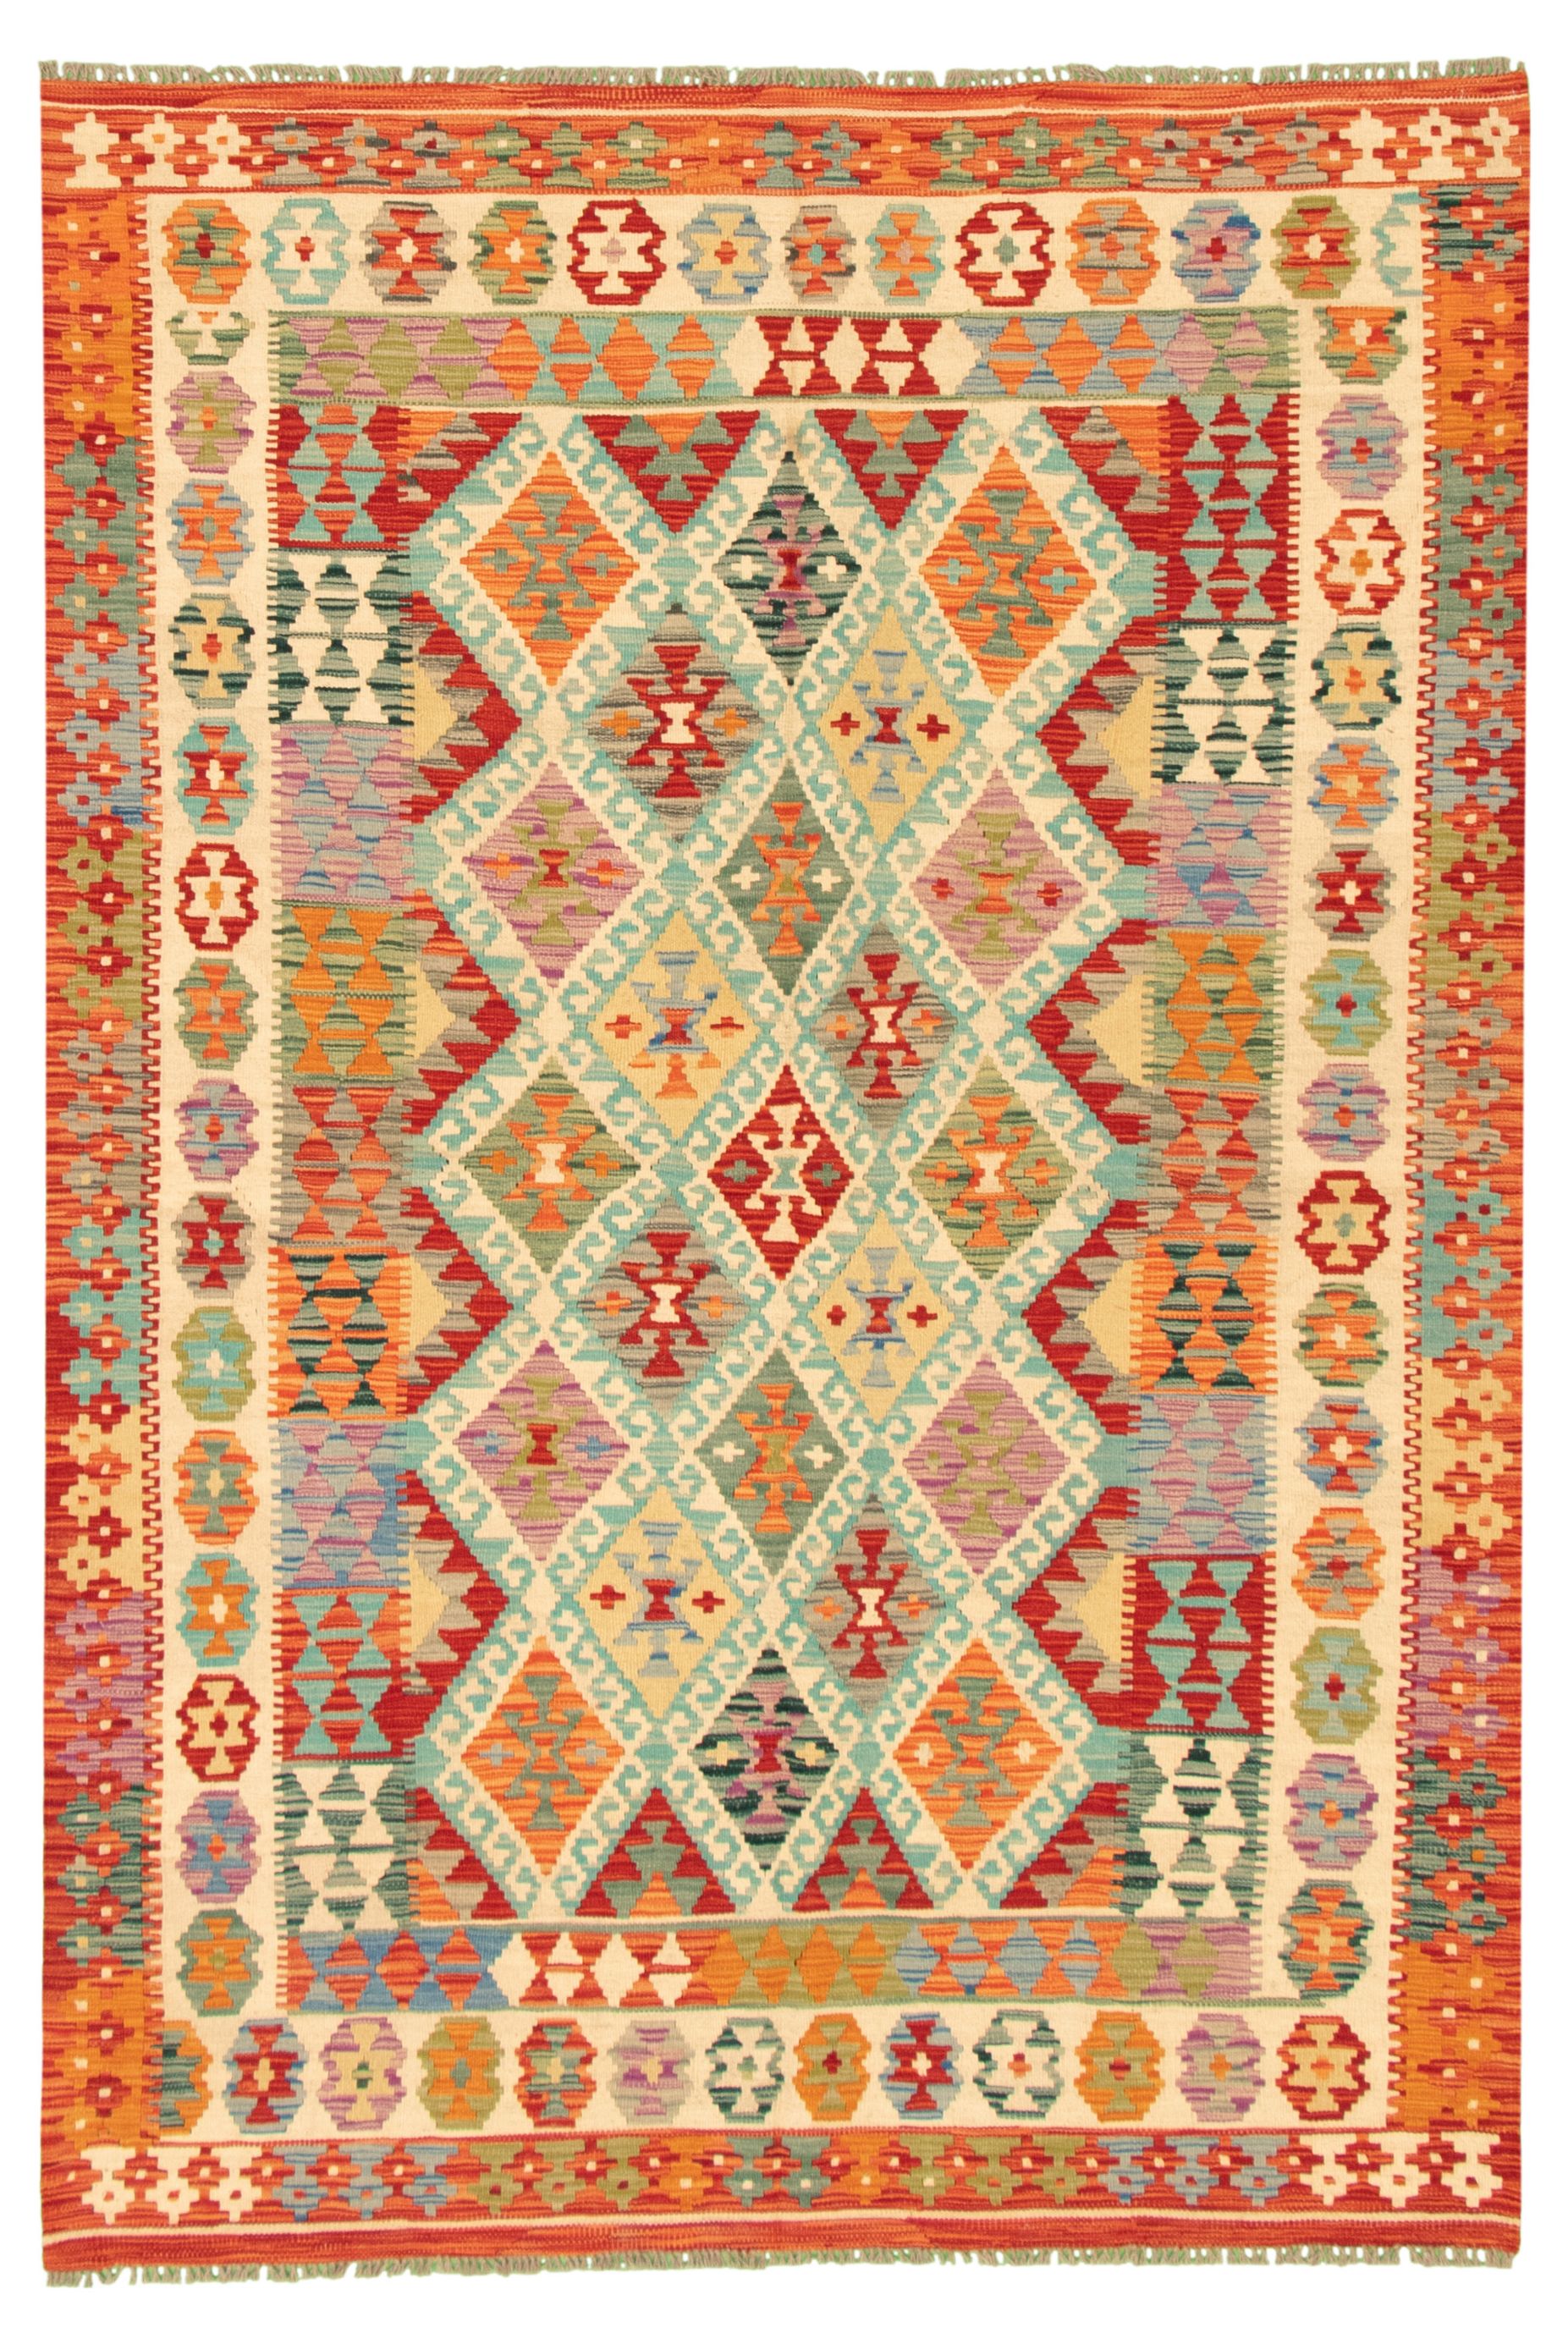 Hand woven Bold and Colorful  Ivory, Red Wool Kilim 5'6" x 8'1" Size: 5'6" x 8'1"  